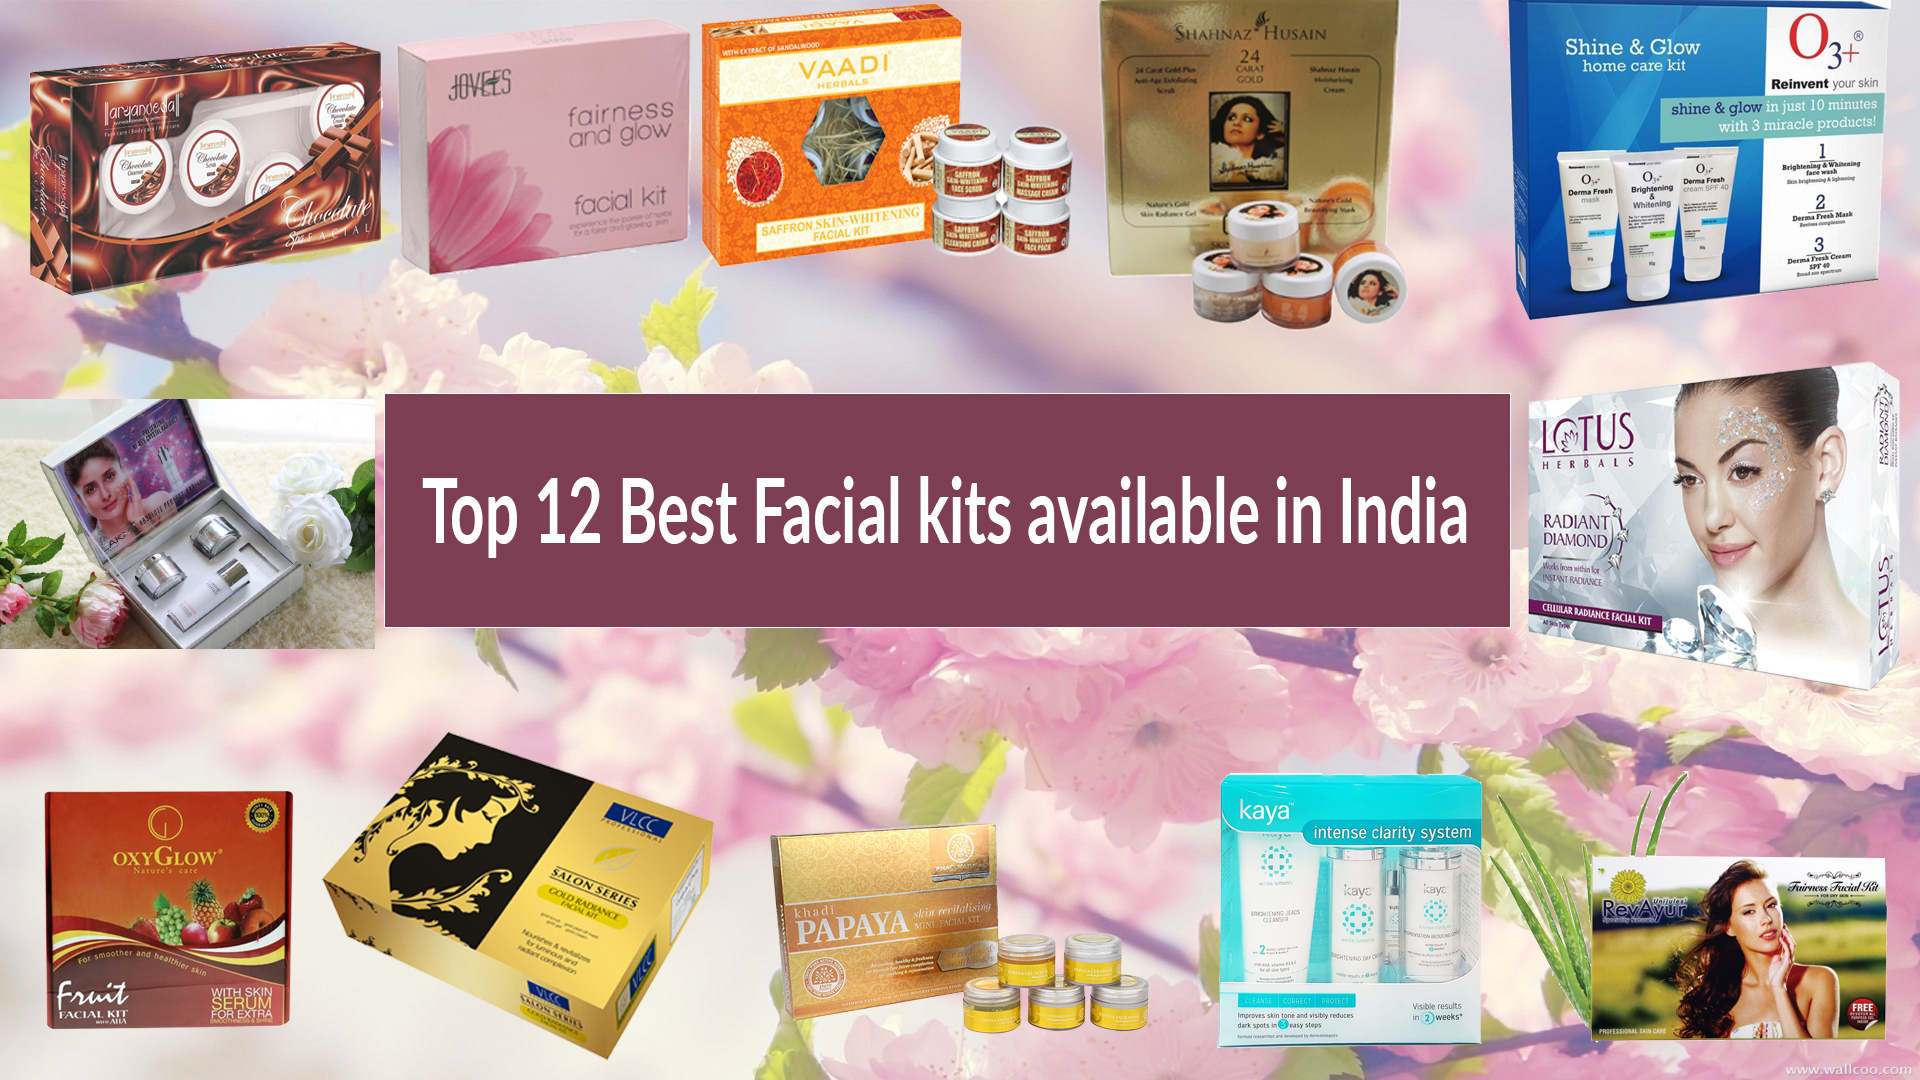 best facial kit for glowing skin